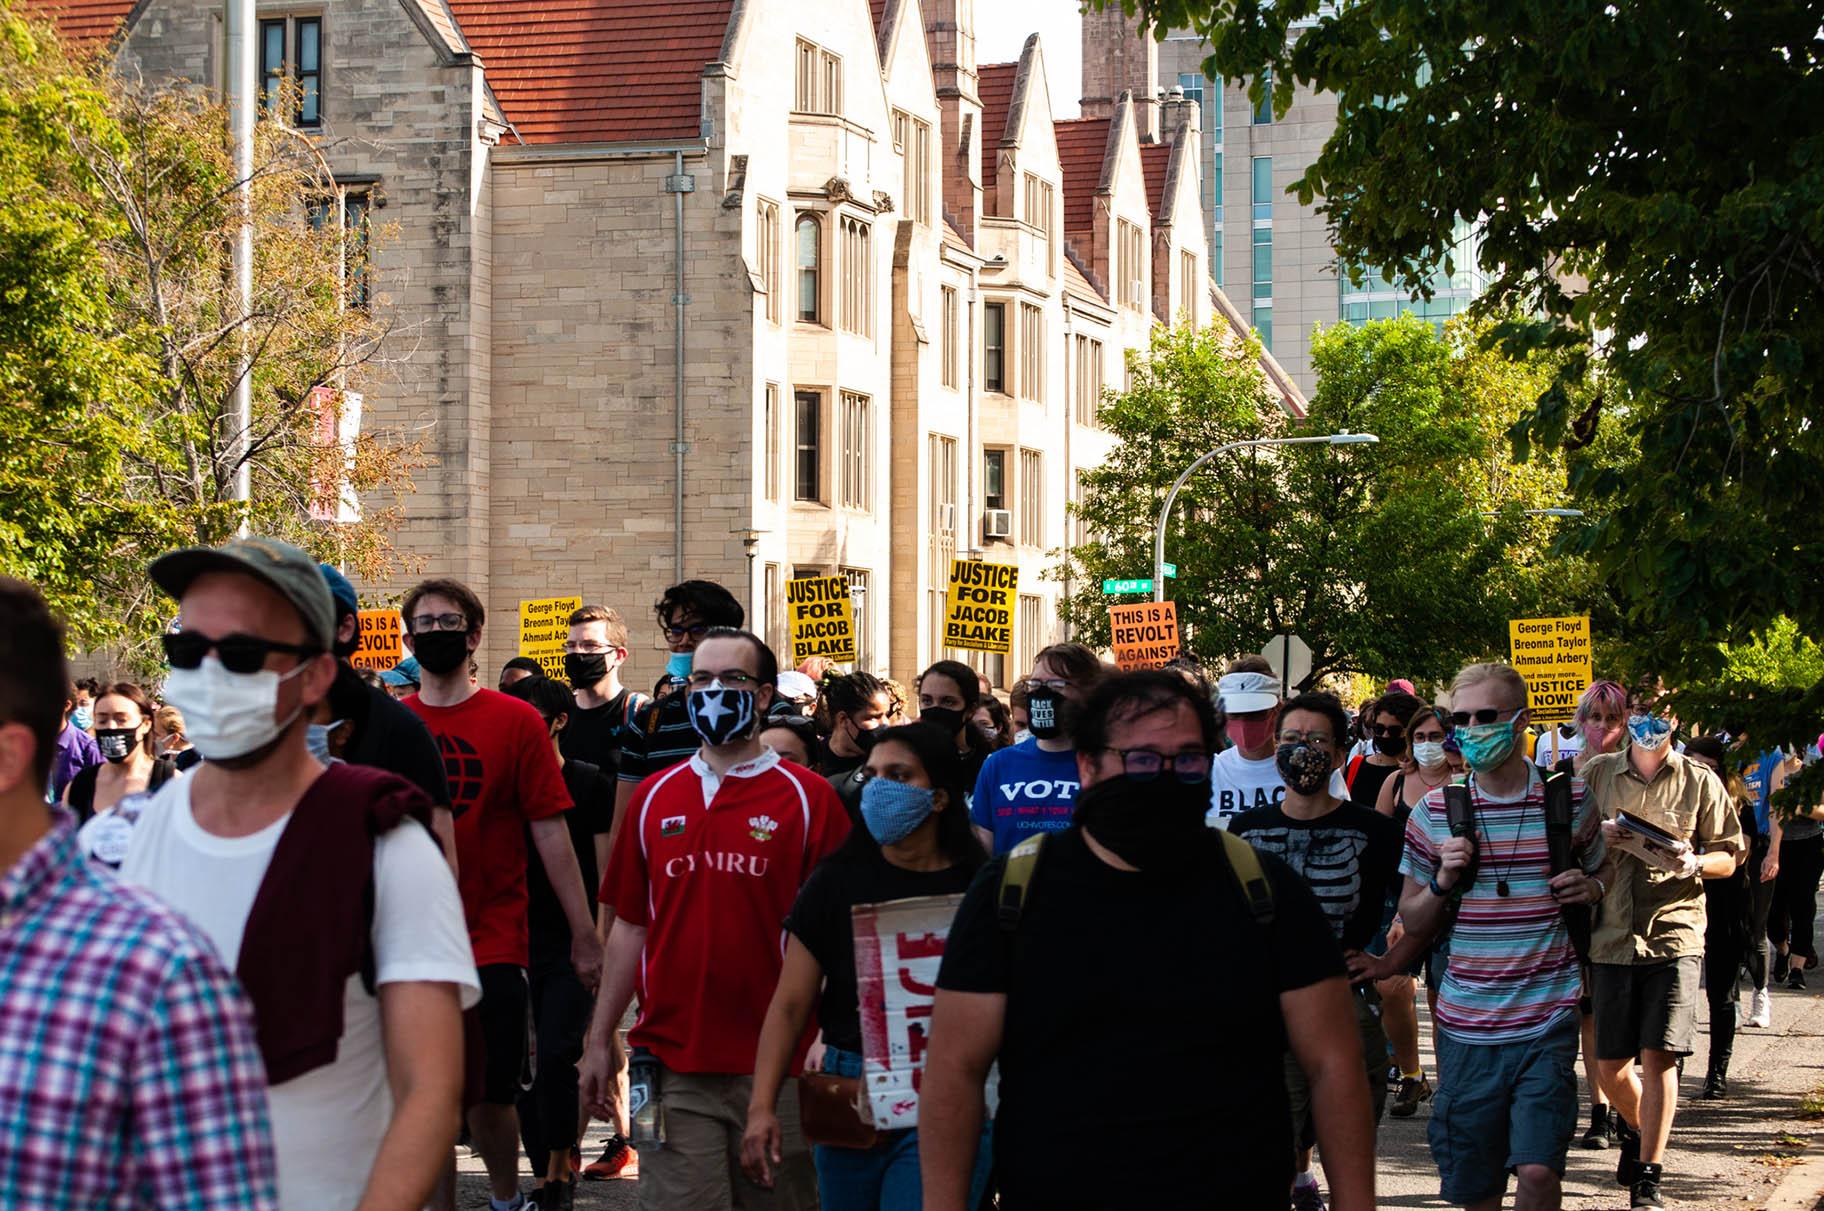 A march against the University of Chicago Police Department was organized by Care Not Cops and UChicago United on Saturday, Aug. 29, 2020. (Grace Del Vecchio / WTTW News)